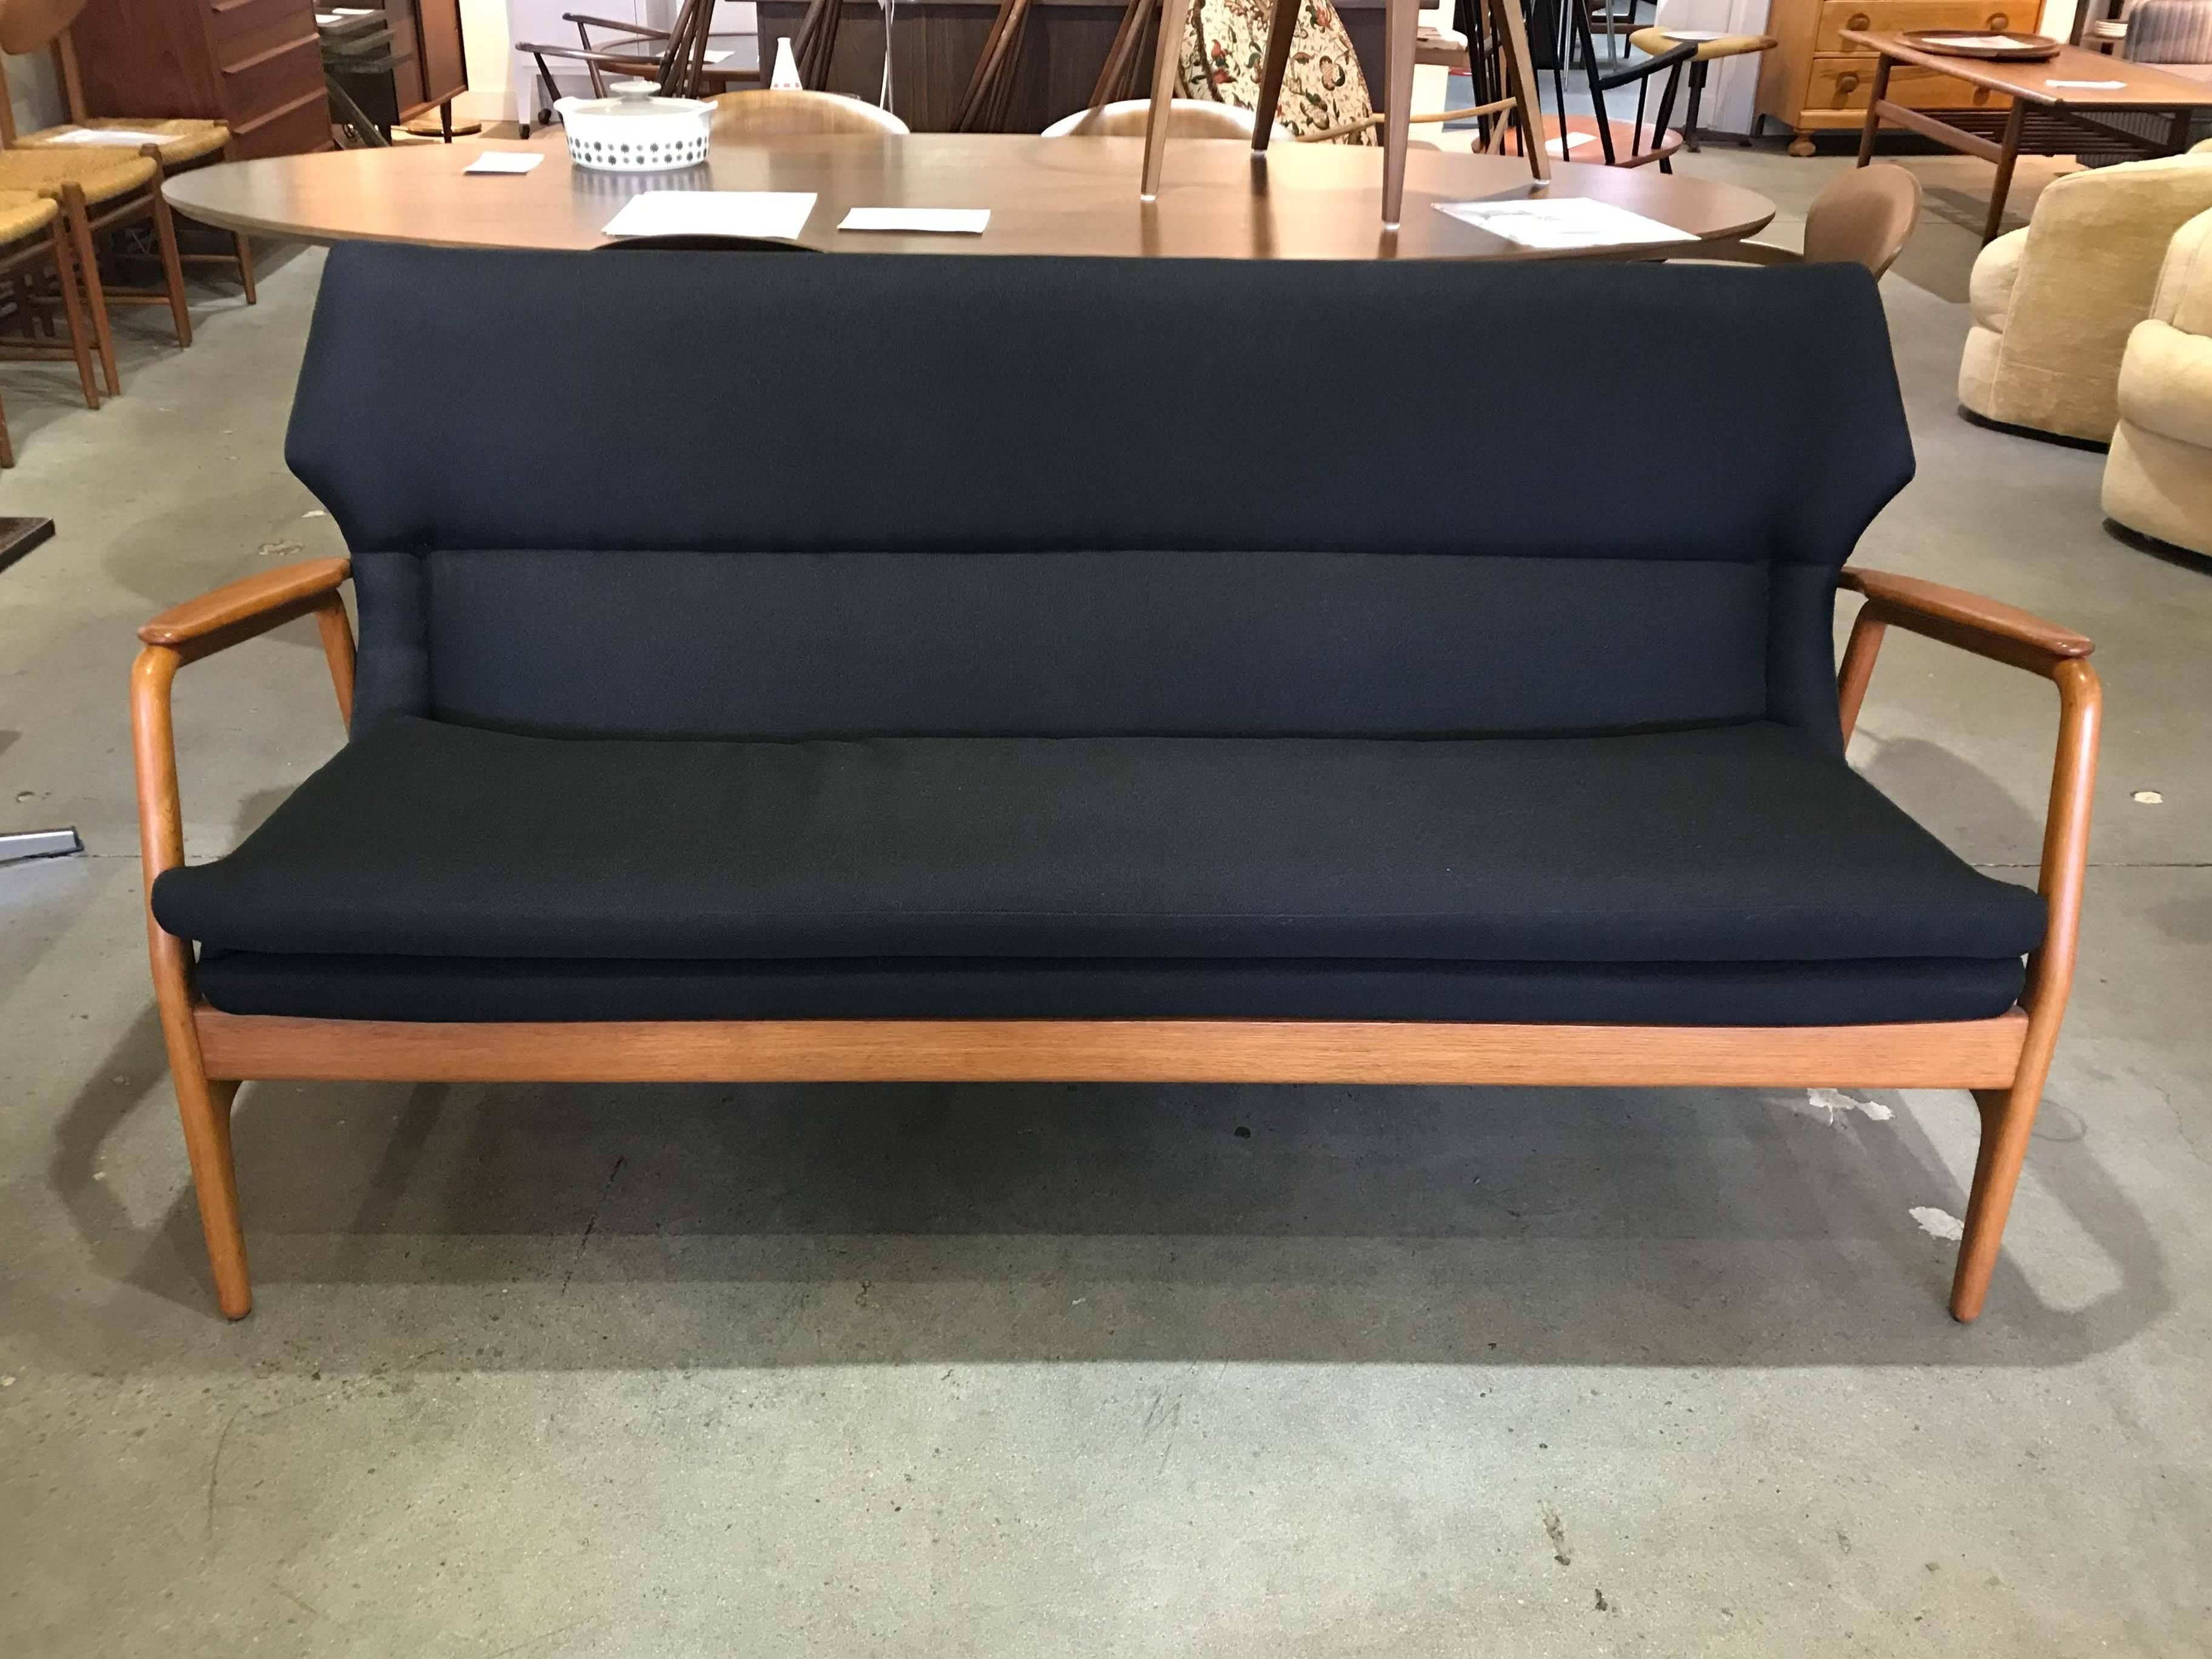 Sofa with solid teak arms and back rail, designed by Aksel Bender Madsen for Bovenkamp. Fully reconditioned with new black upholstery. Note the small crack in the back rail on the corner; this does not affect the stability of the settee which is